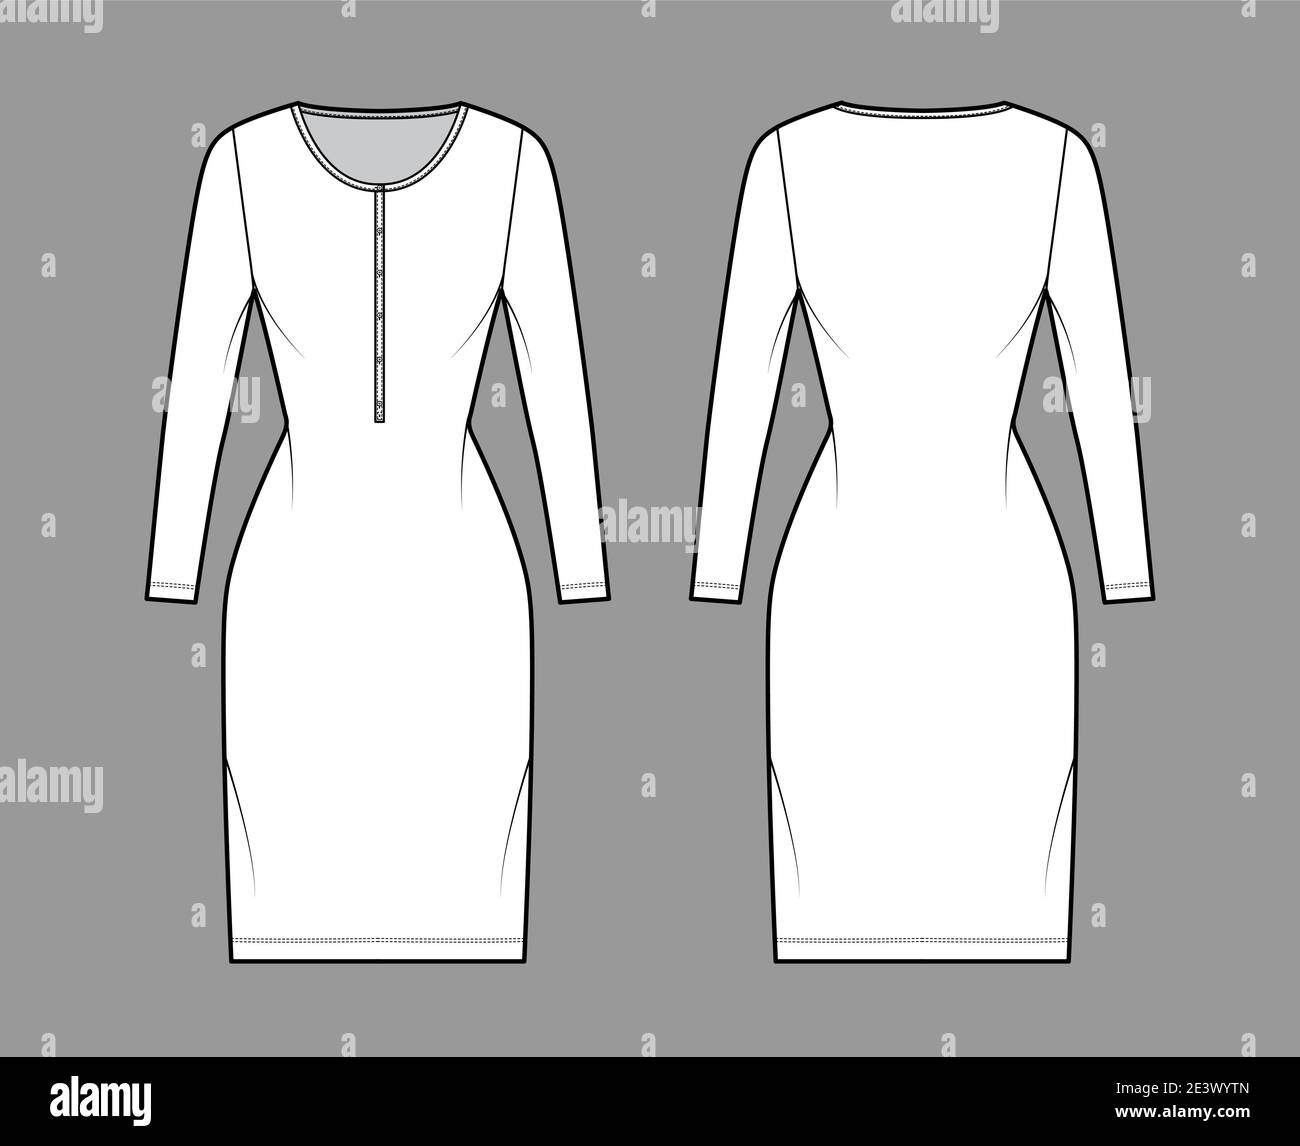 Shirt dress technical fashion illustration with henley neck, long sleeves, knee length, fitted body, Pencil fullness. Flat apparel template front, back, white color. Women, men, unisex CAD mockup Stock Vector